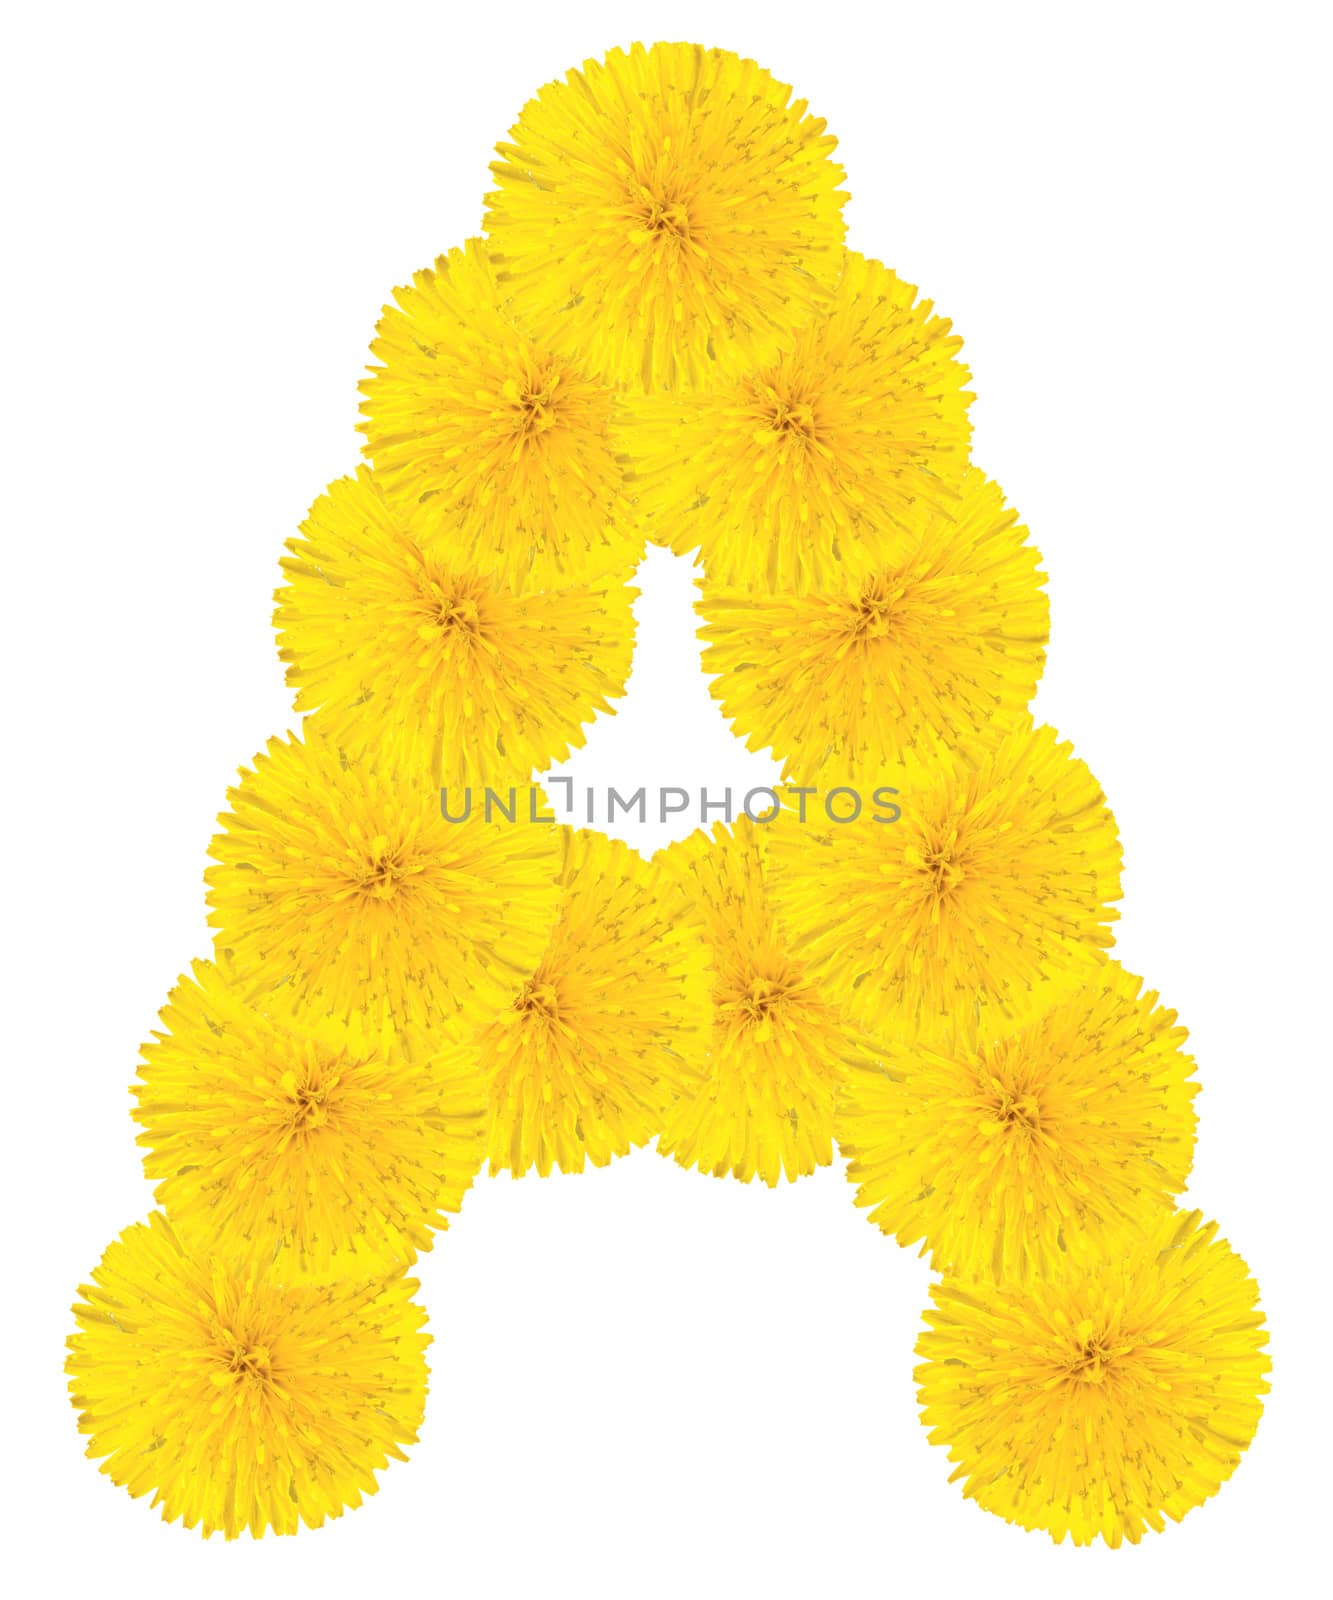 Letter A made from dandelion flowers isolated on white background